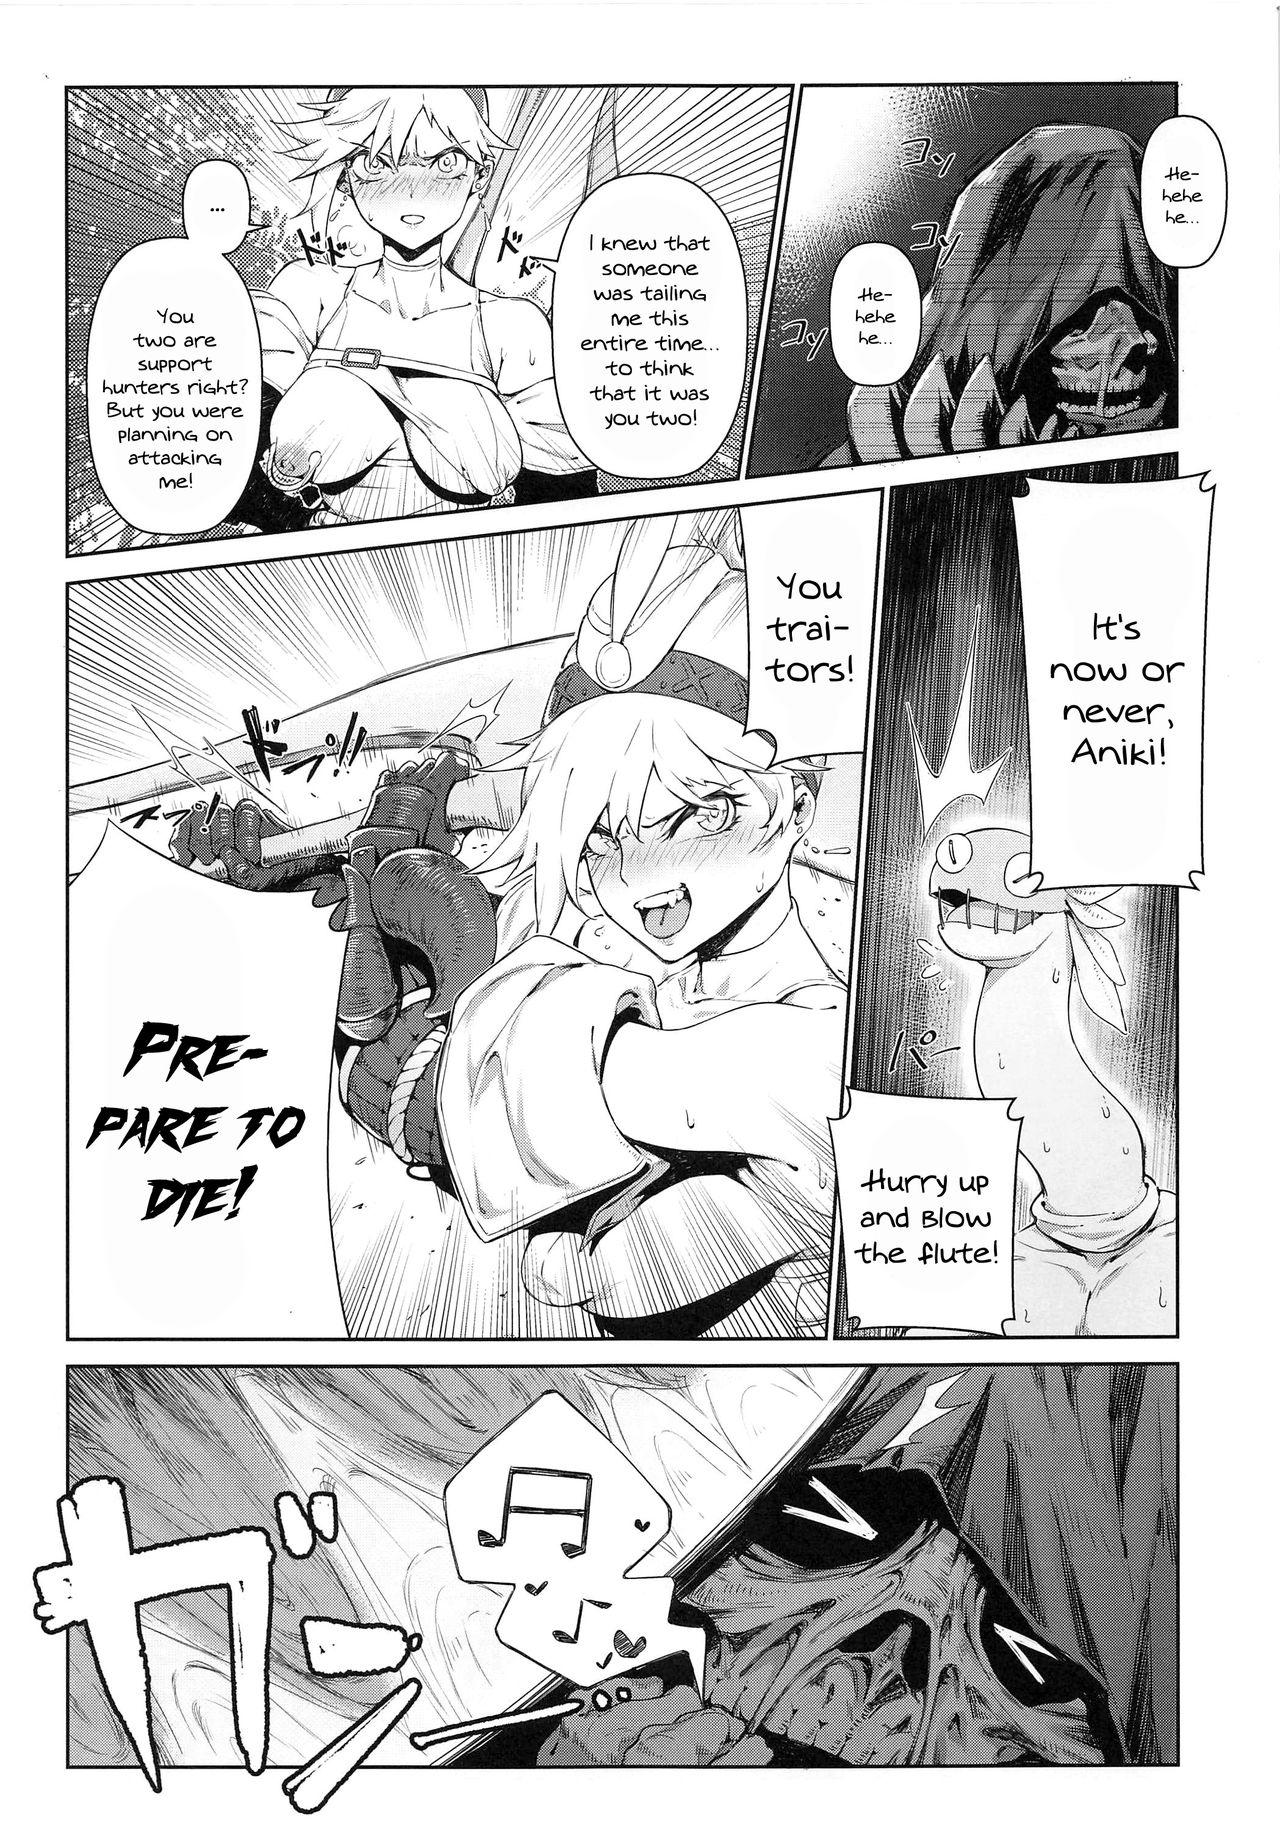 Trans Extreme Anal Hunter - Monster hunter 18 Porn - Page 7